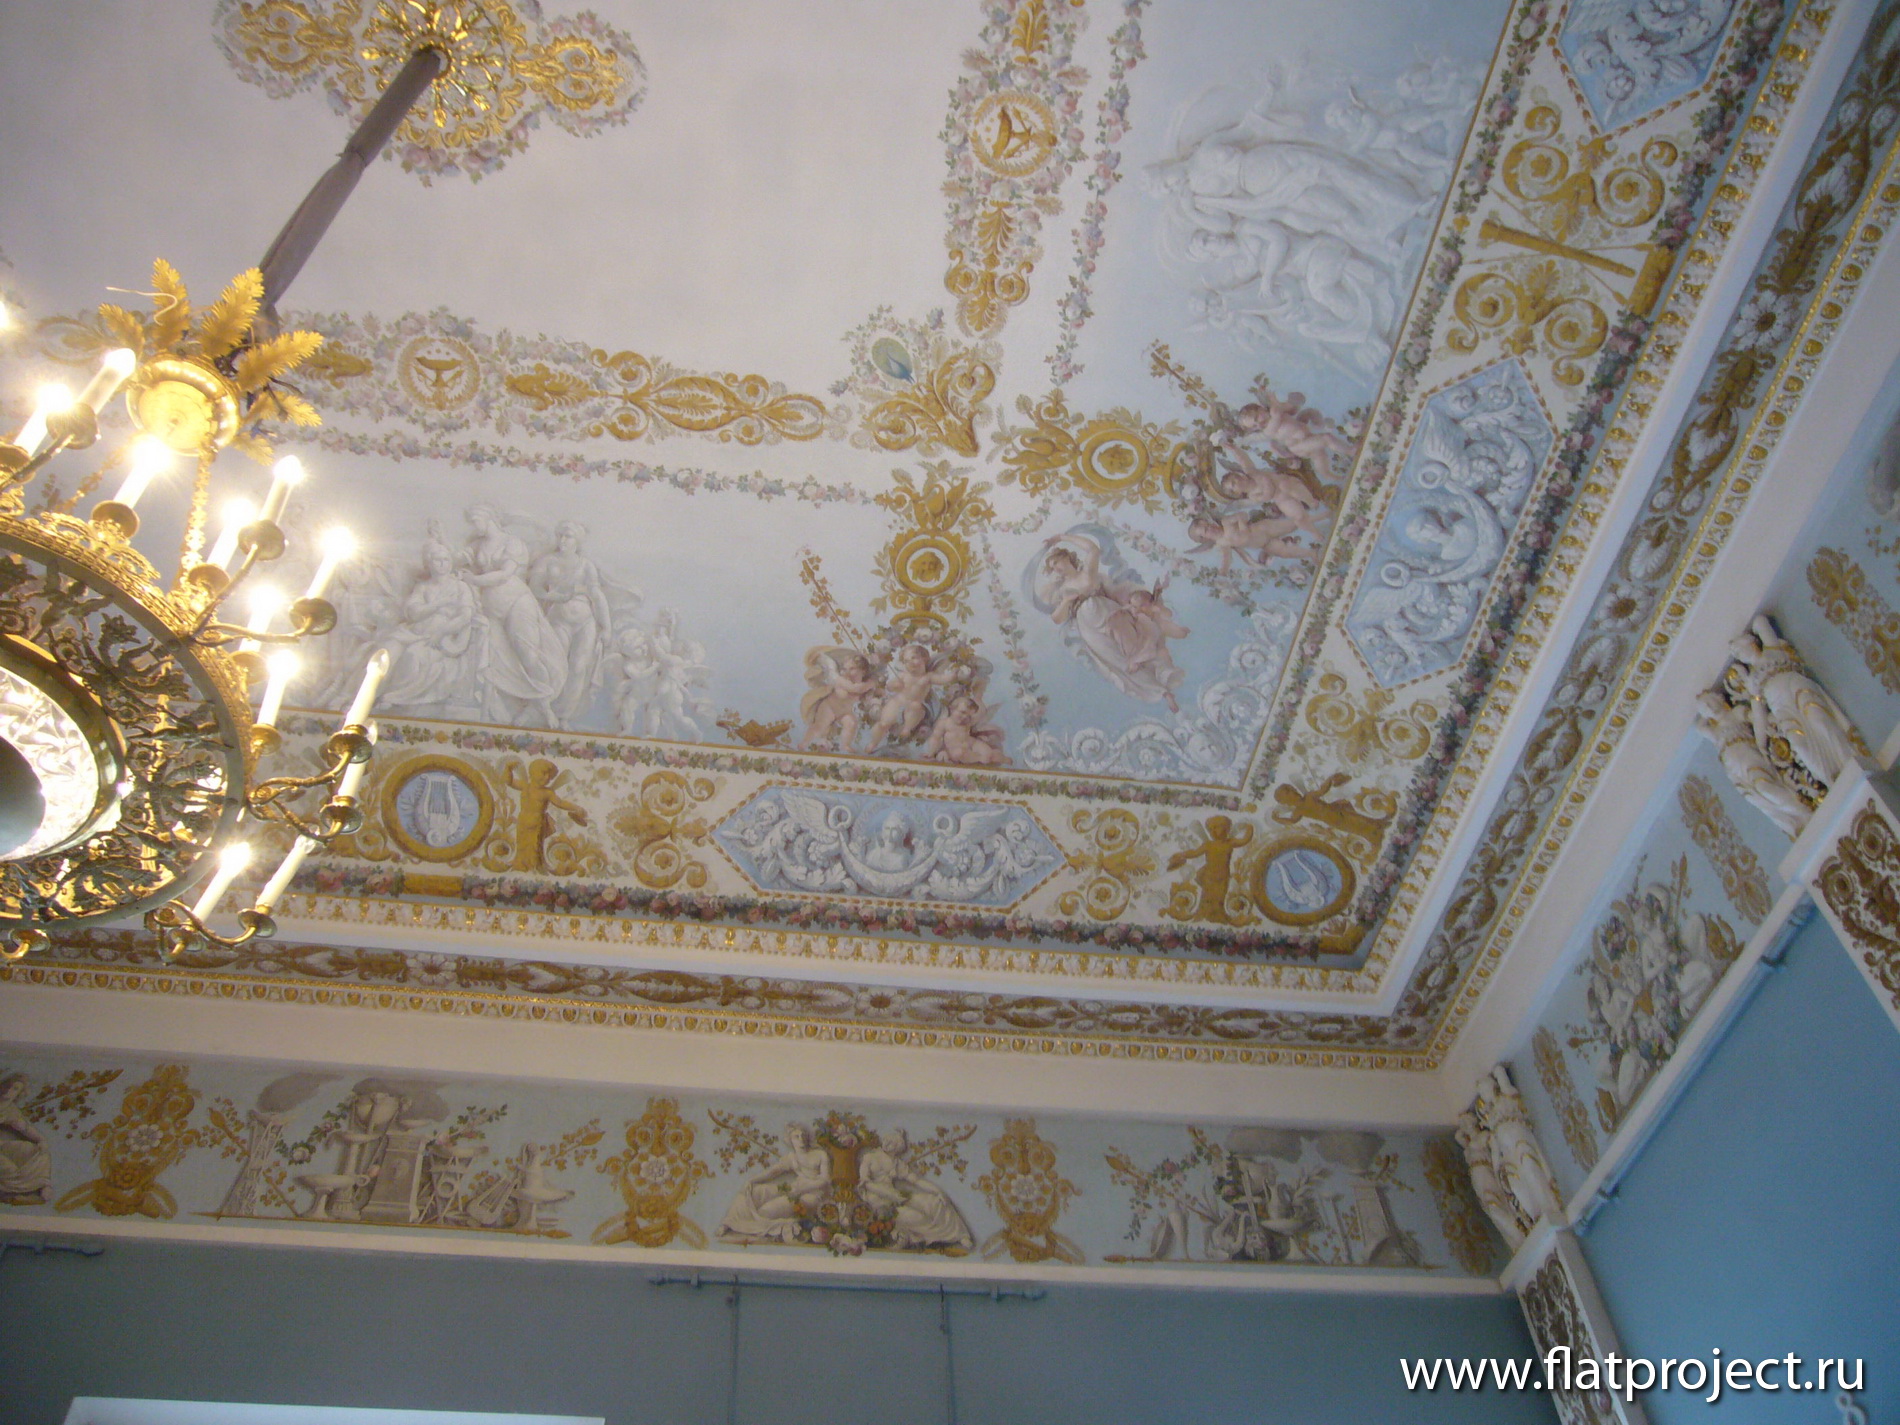 The State Russian museum interiors – photo 76